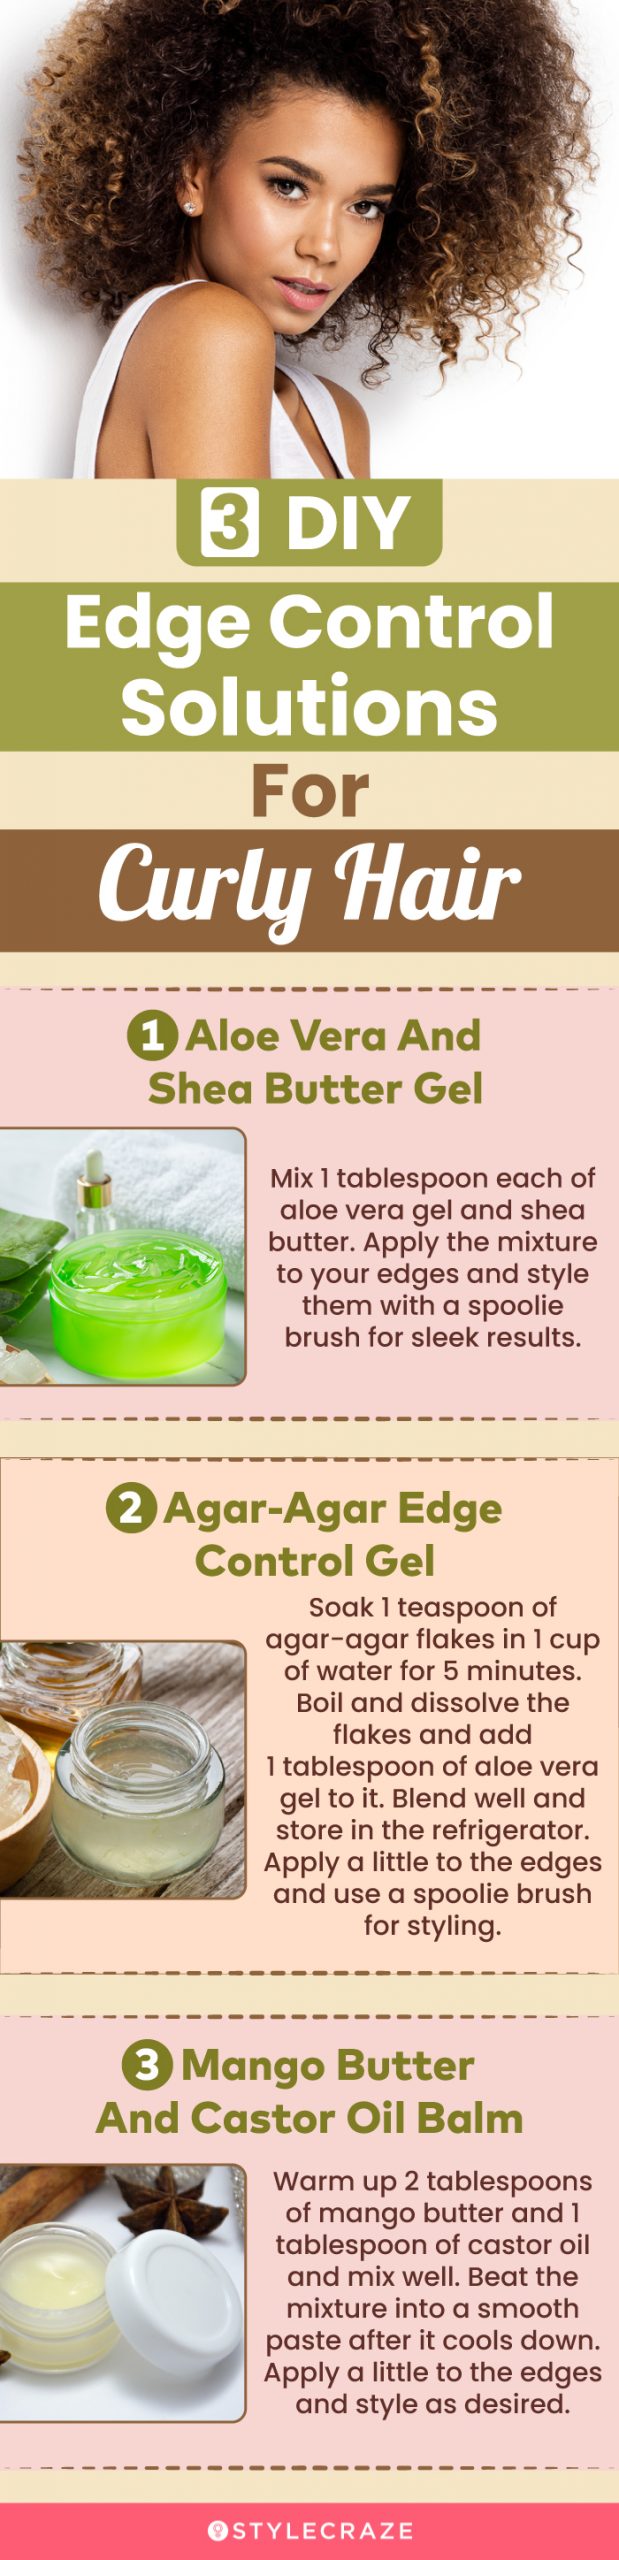 3 diy edge control solutions for curly hair (infographic)